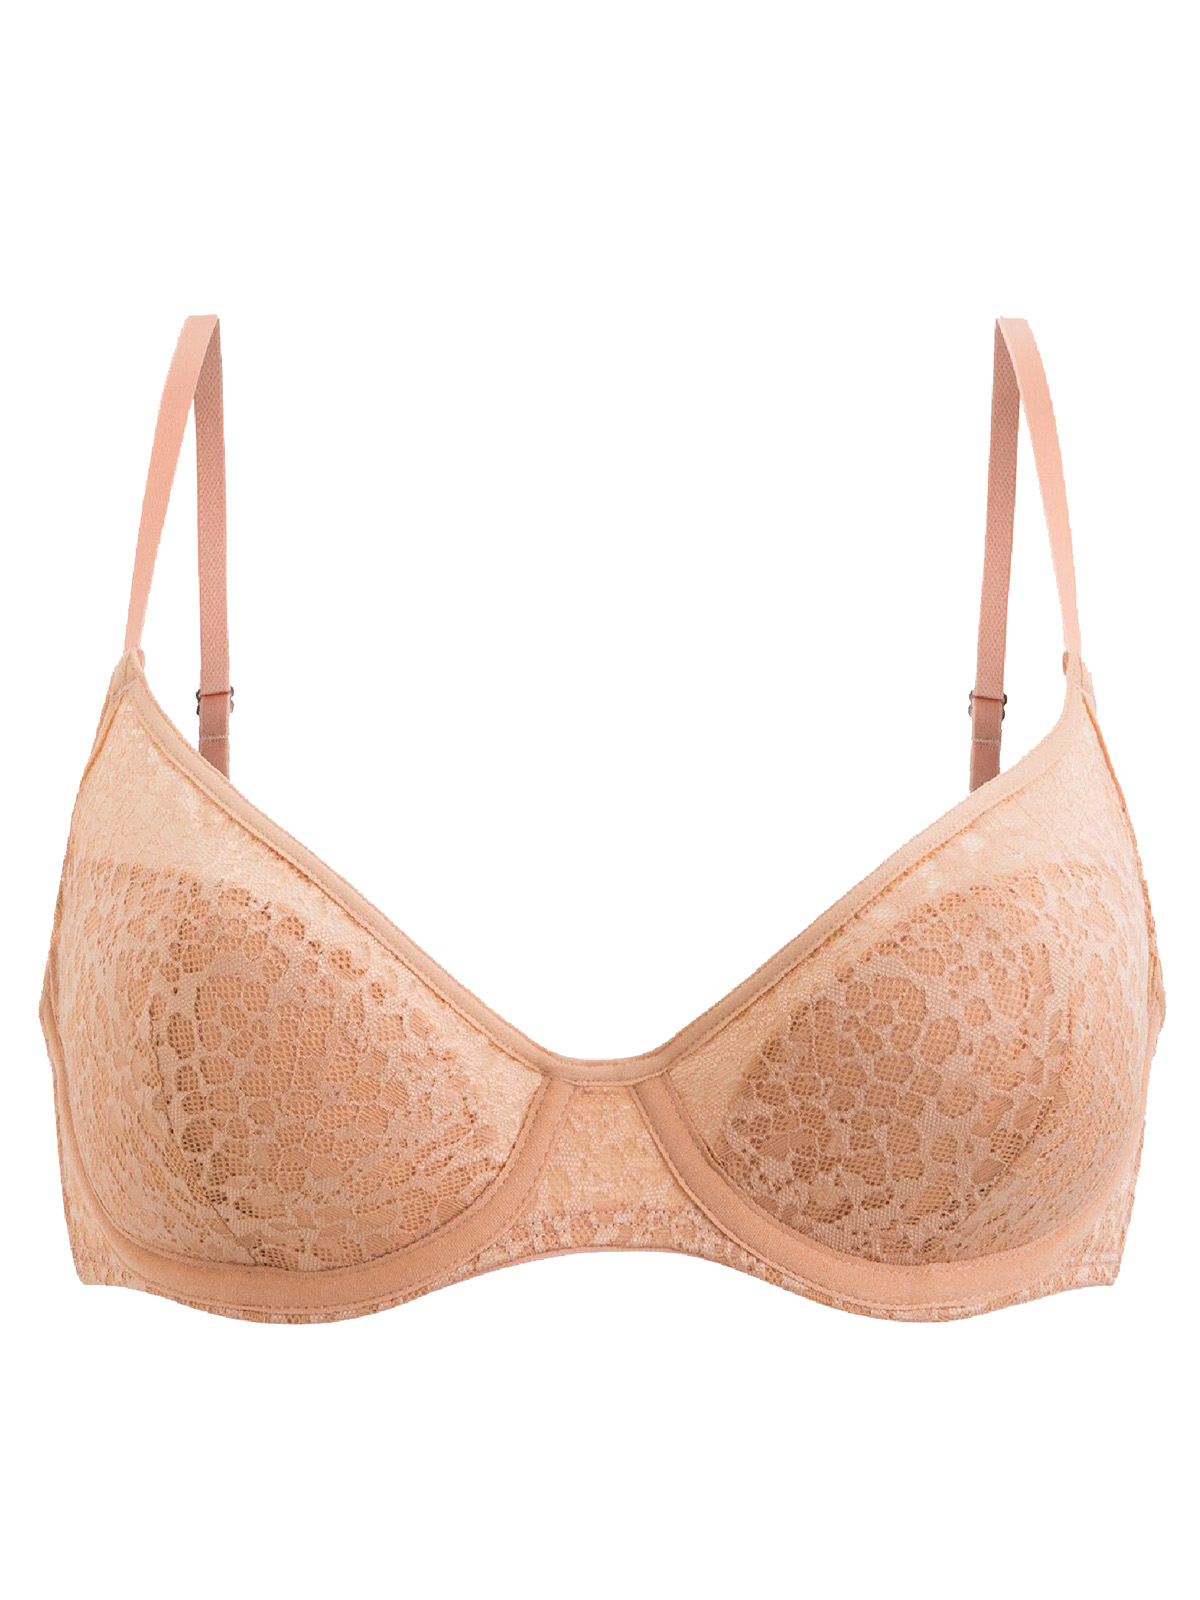 Wholesale Lingerie Spanish Brand Oysho - - OYSHO SAND Lace Moulded Cup  Wired Bra - Size 34 to 38 (B cup)